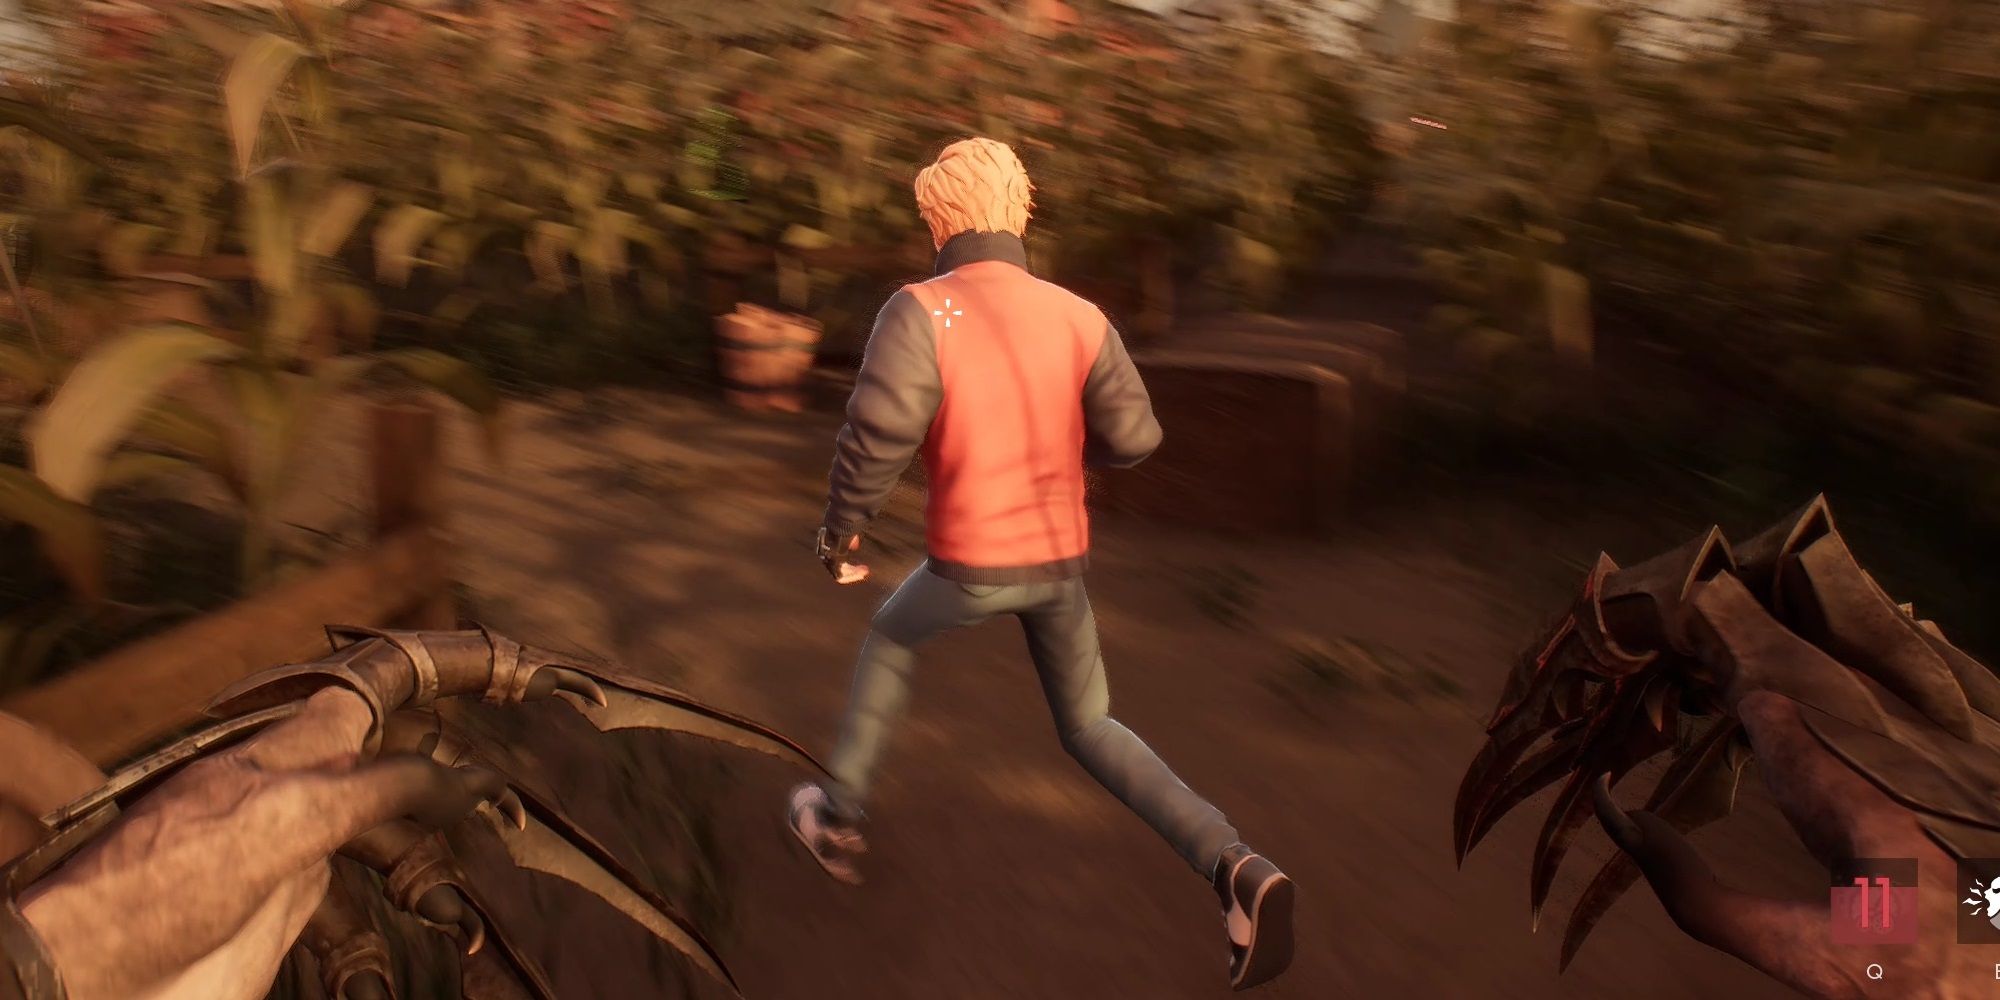 Propnight - A picture of a person running away from a killer.